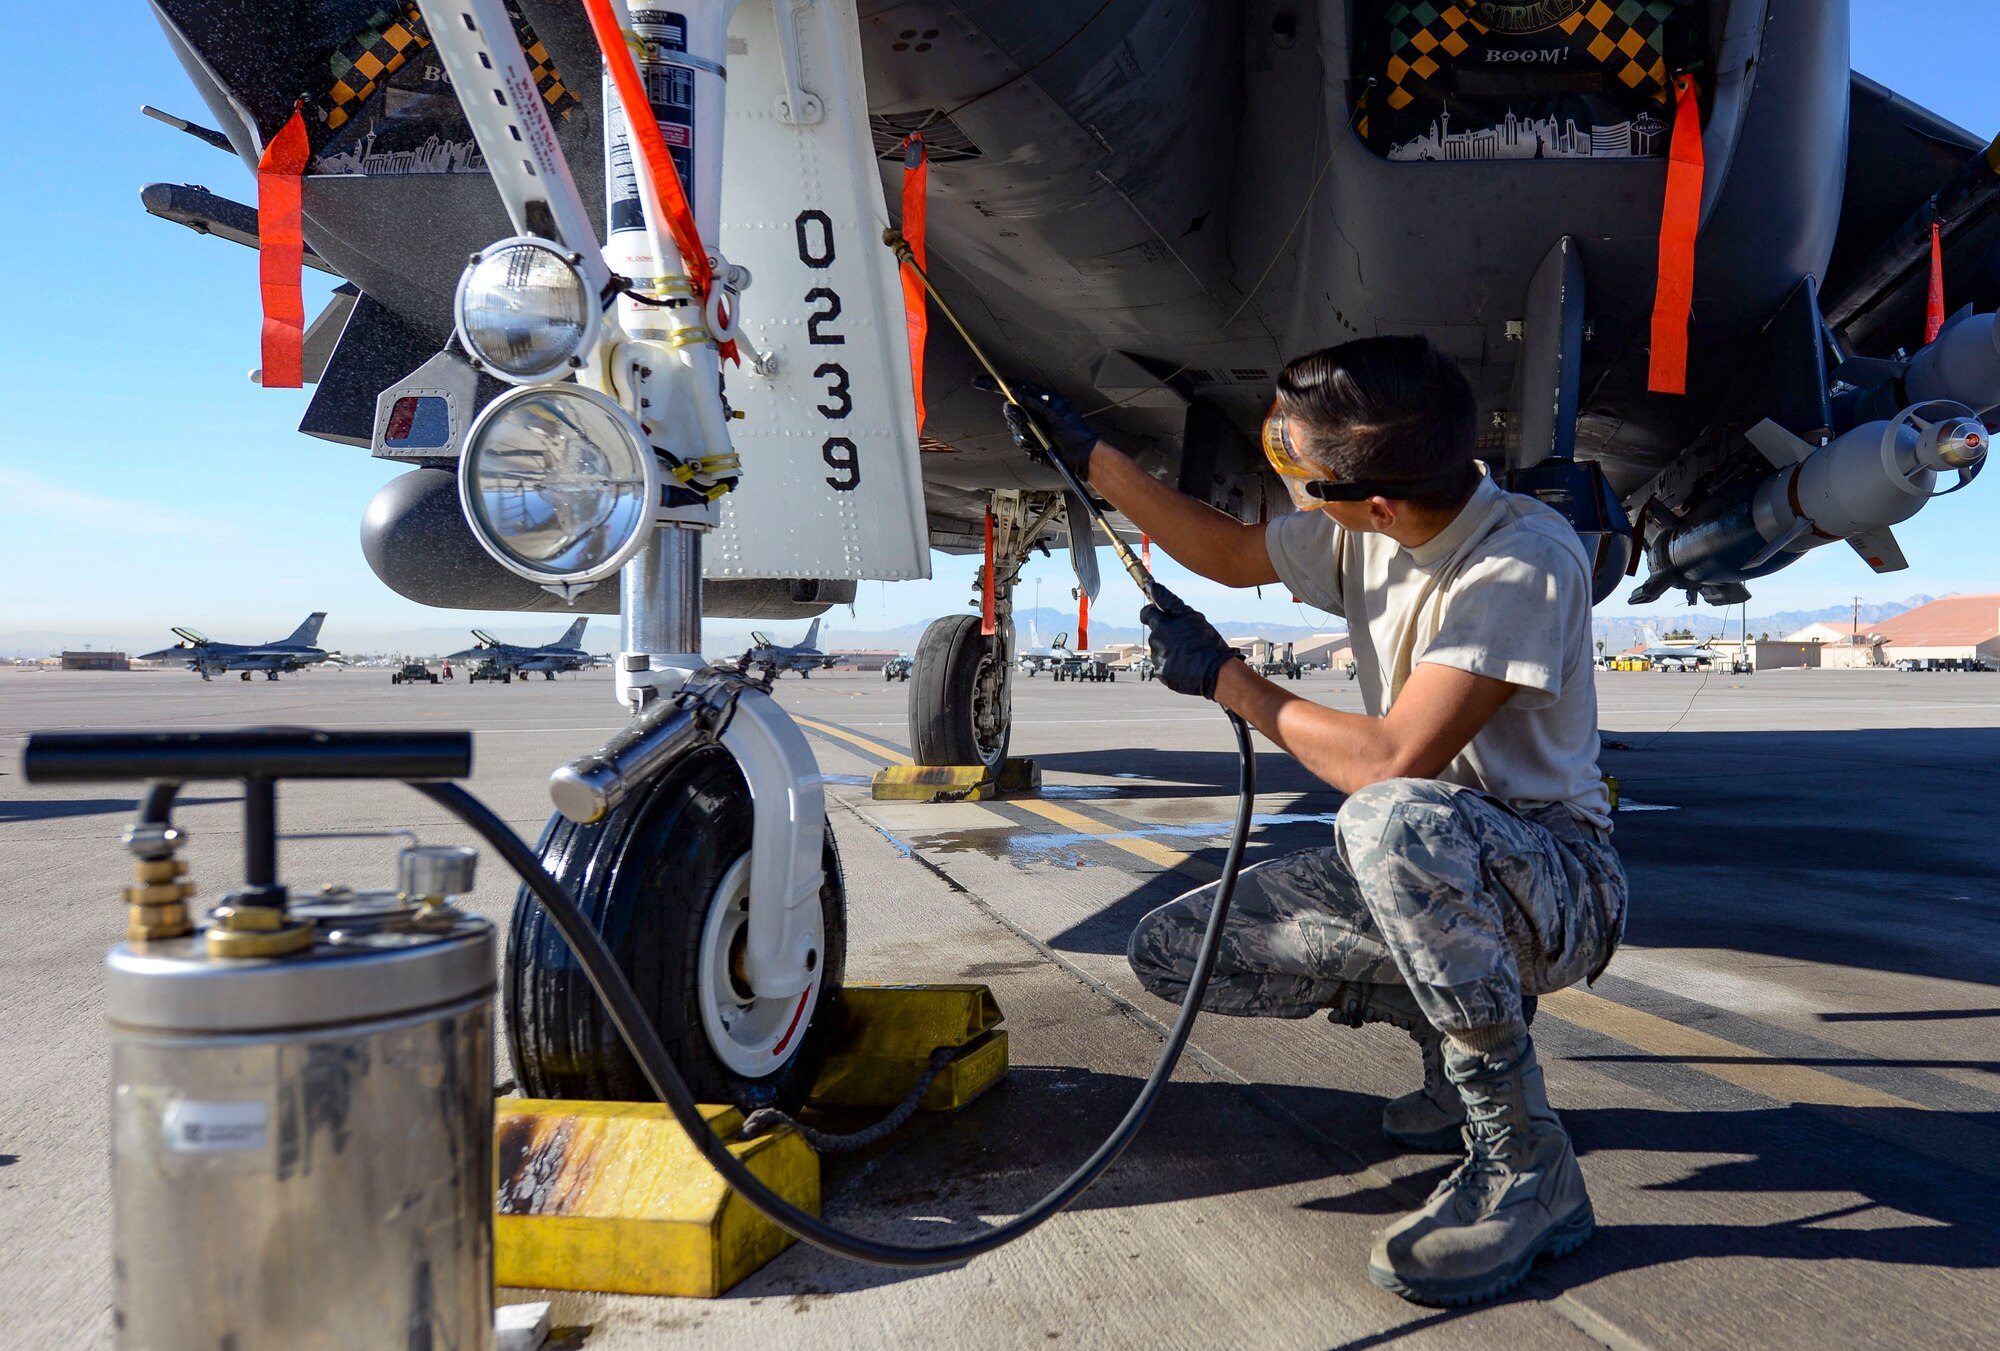 Airman 1st Class Bonifacio Garcia, 757th Aircraft Maintenance Squadron Strike Aircraft Maintenance Unit F-15E Strike Eagle fighter jet maintainer, cleans an F-15E landing gear while participating in a Gunsmoke Competition Nov. 15, 2018 at Nellis Air Force Base, Nevada. The Gunsmoke Competition has been brought back to Nellis to boost morale and readiness across the flightline. (U.S. Air Force photo by Airman Bailee A. Darbasie)